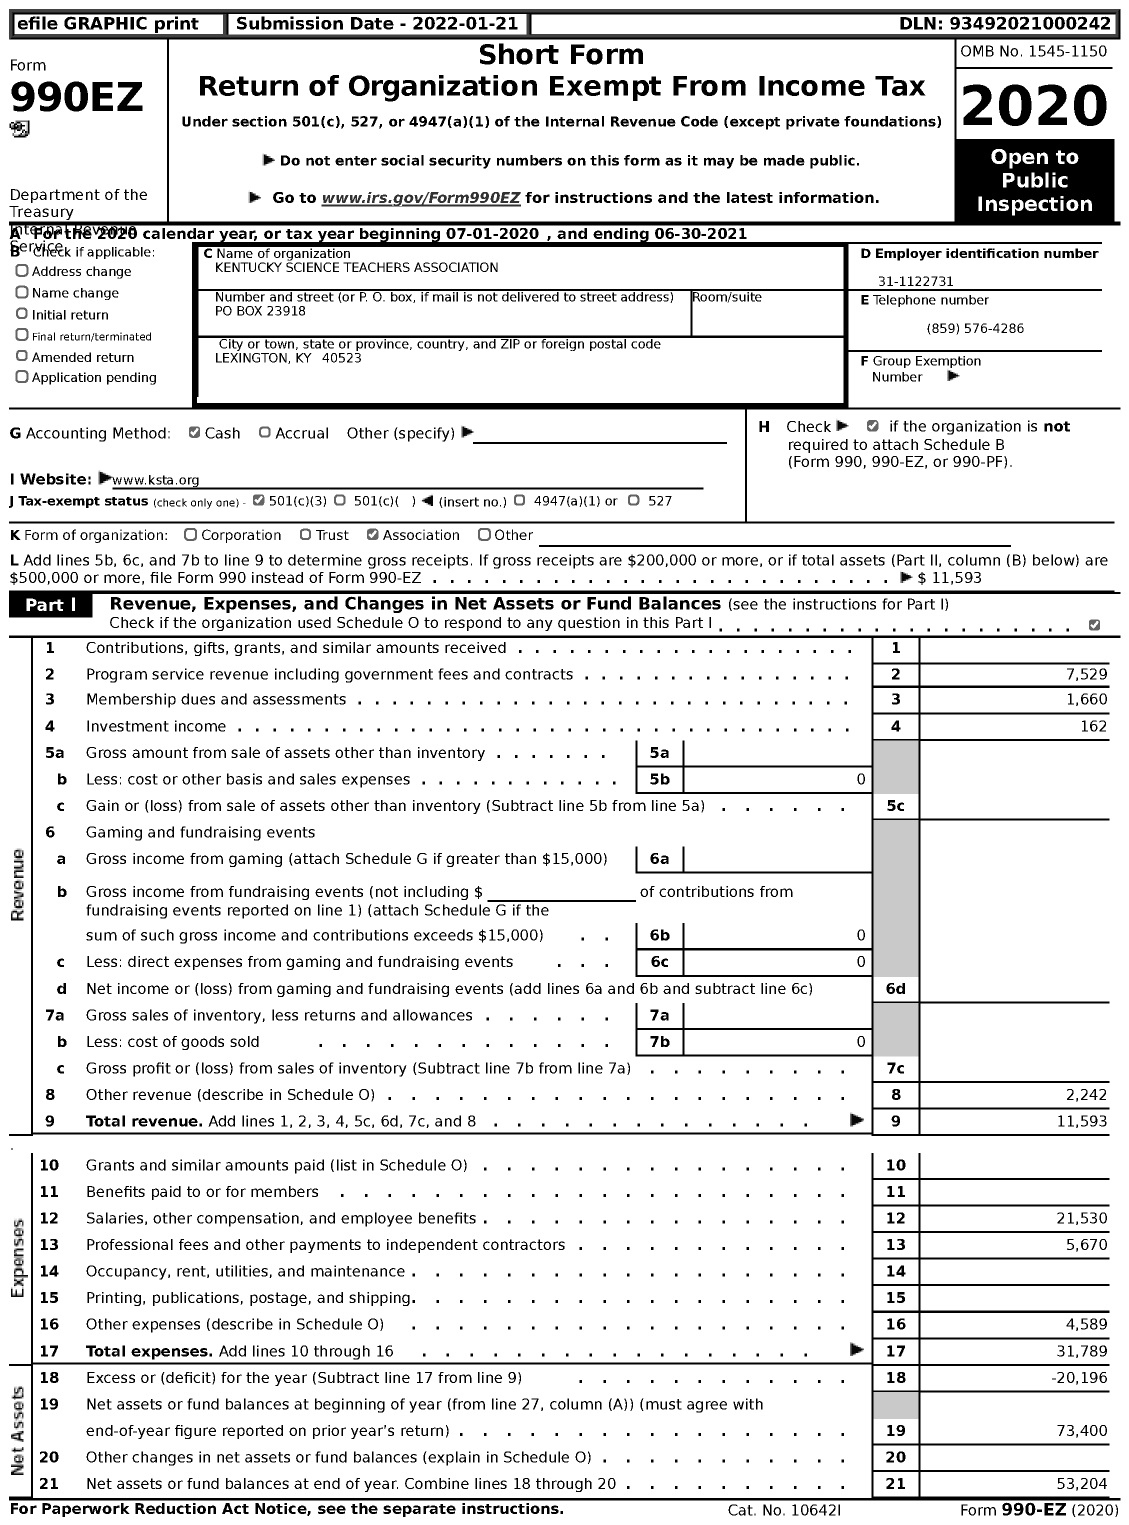 Image of first page of 2020 Form 990EZ for Kentucky Science Teachers Association (KSTA)